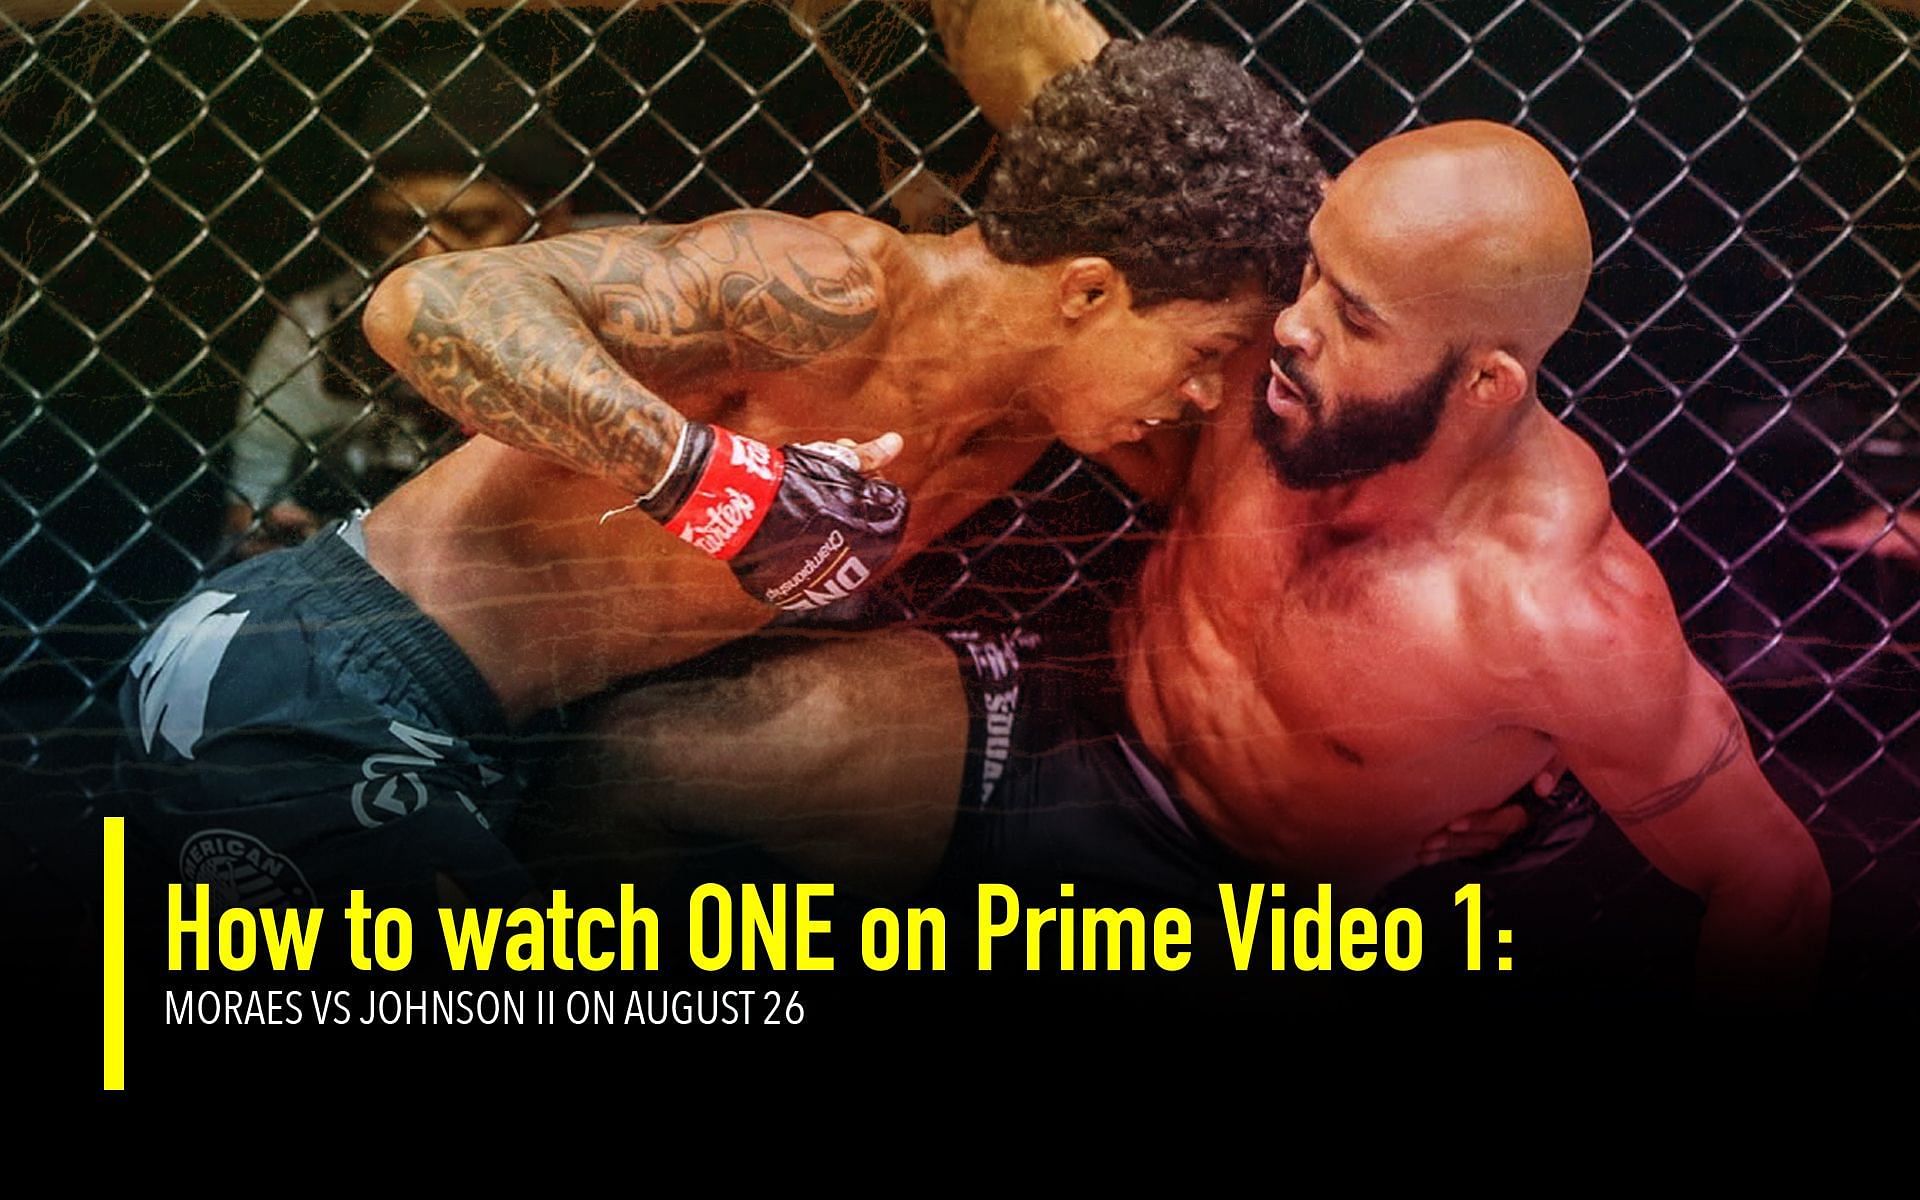 Adriano Moraes will rematch Demetrious Johnson in the main event of ONE on Prime Video 1: Moraes vs. Johnson II (Image courtesy of ONE)